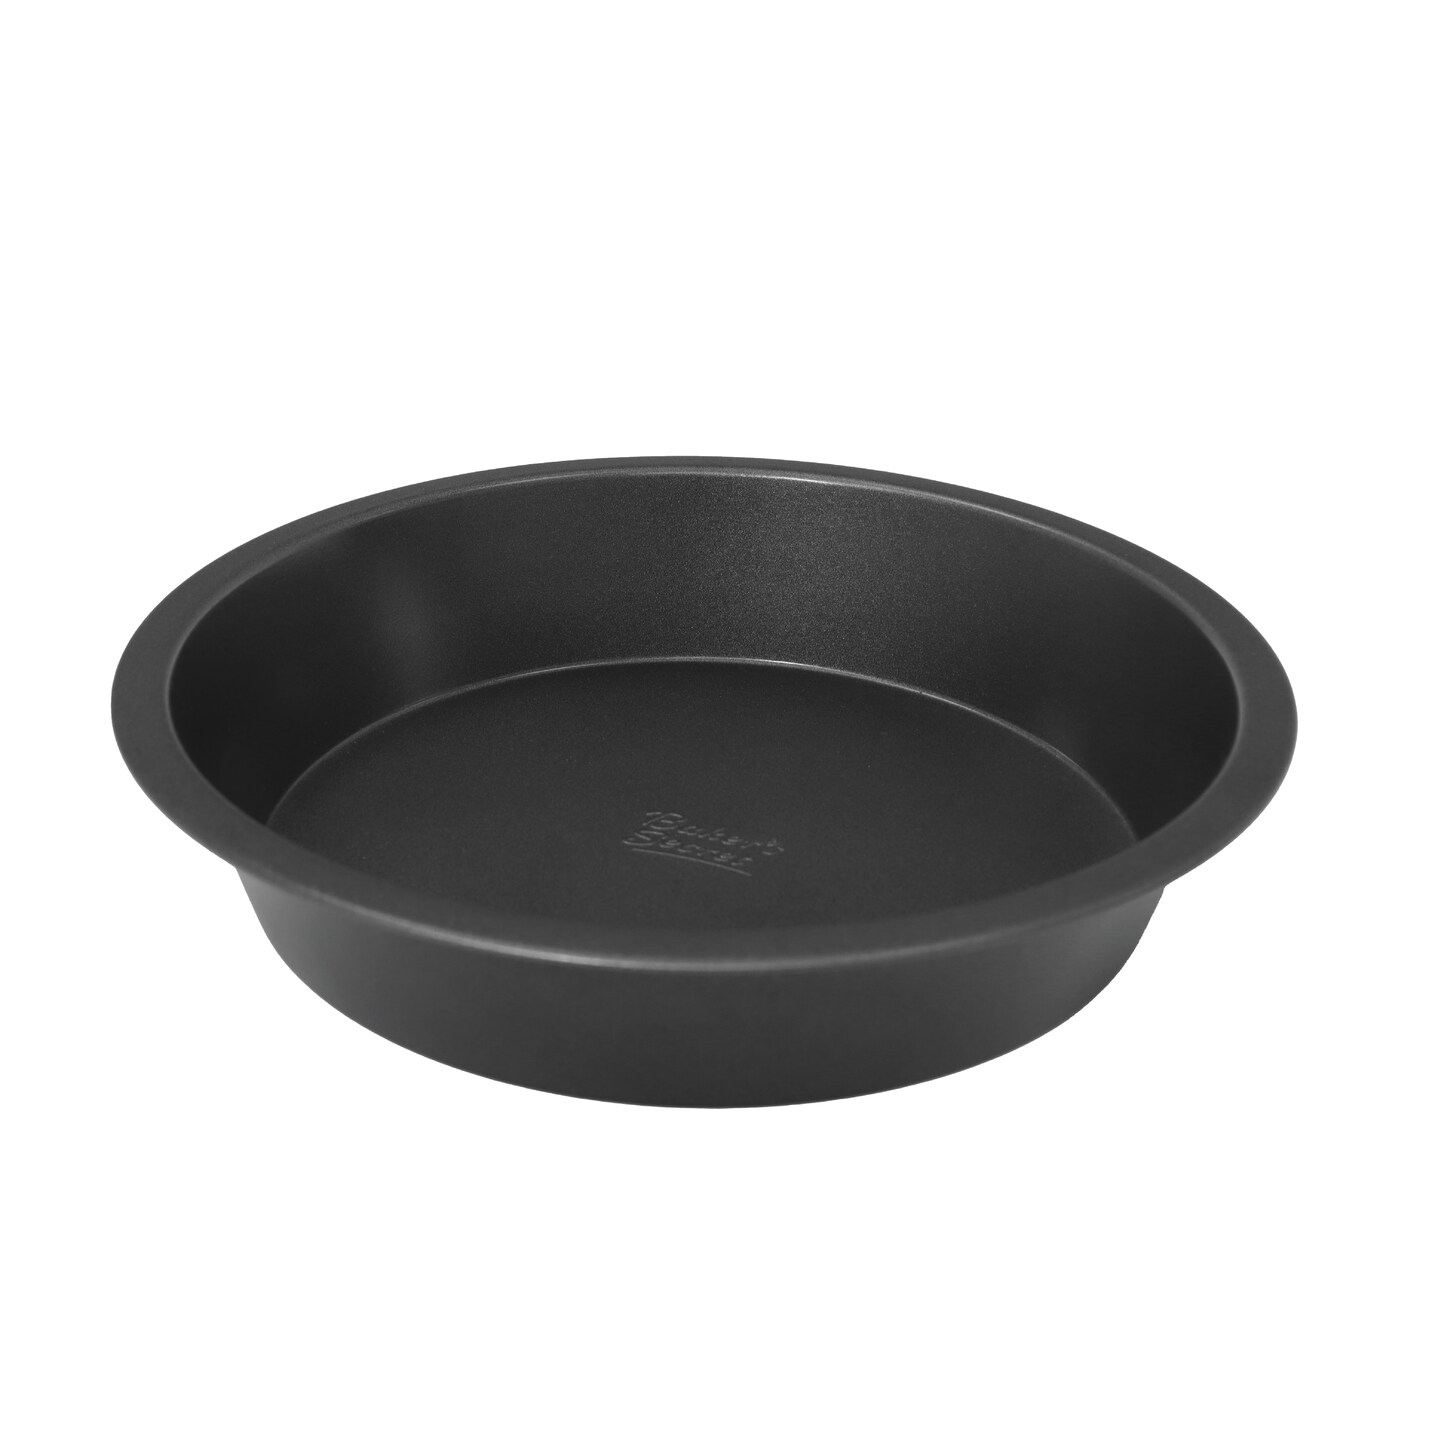 Baker&#x27;s Secret Round Pan Cake Pan, 9.5&#x22; Carbon Steel Cake Pan with Premium Food-Grade Nonstick Coating for Easy Release, Round Baking Cake Pan Bakeware Accessories - Essentials Collection